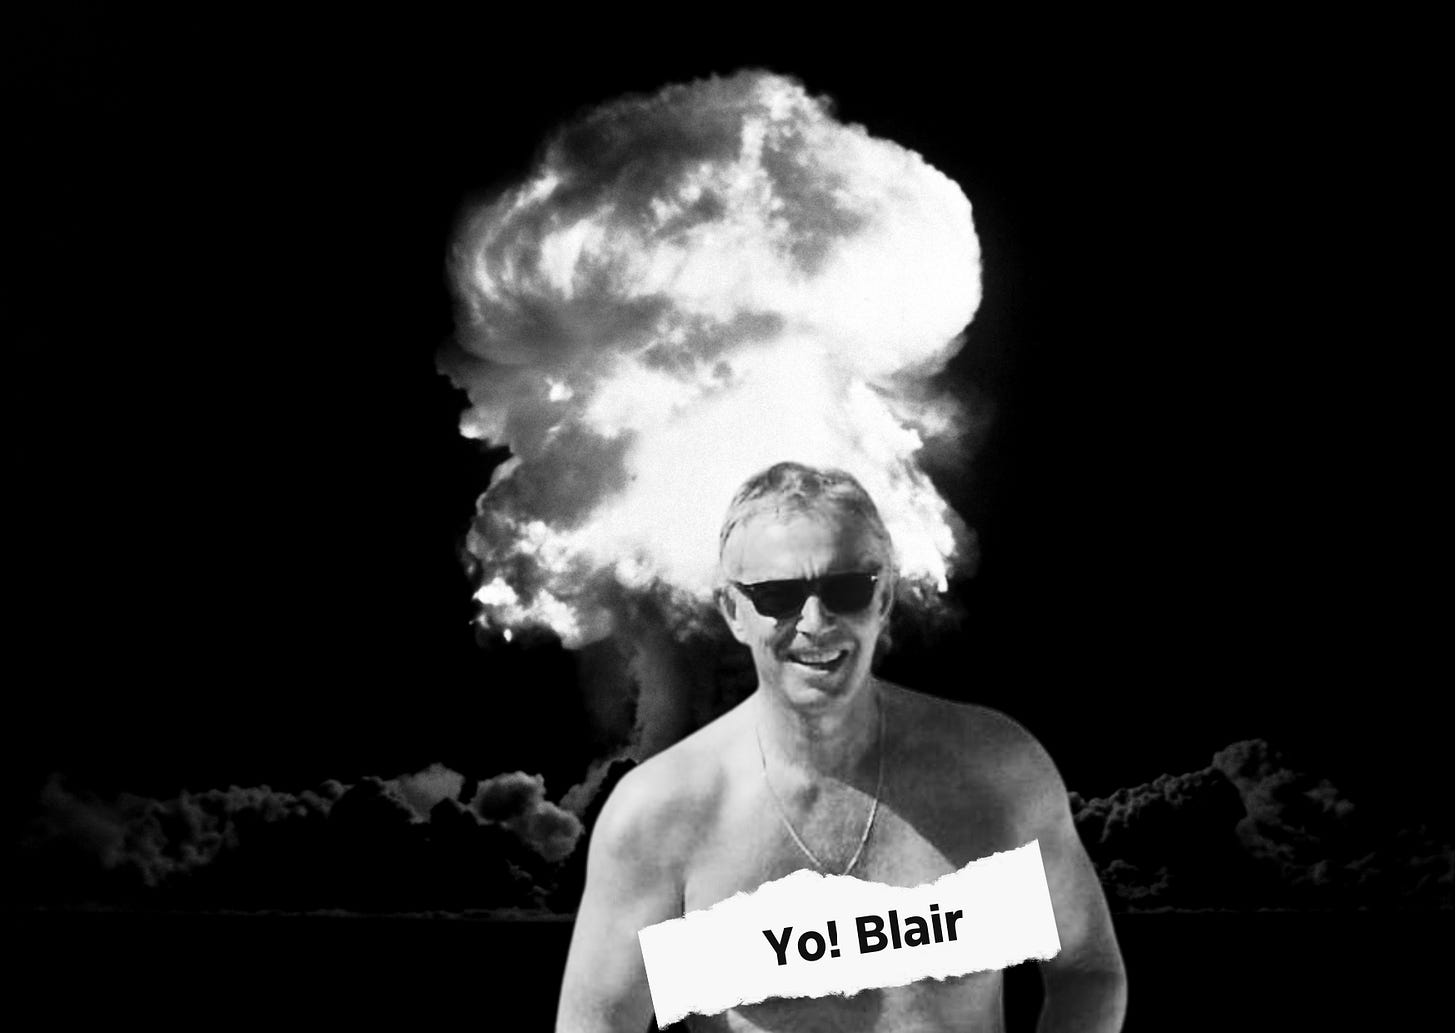 Tony Blair shitless with sunglasses on, stood in front of a black and white image of an atomic exploison. A piece of ripped paper over Blair's chest reads, "Yo! Blair."